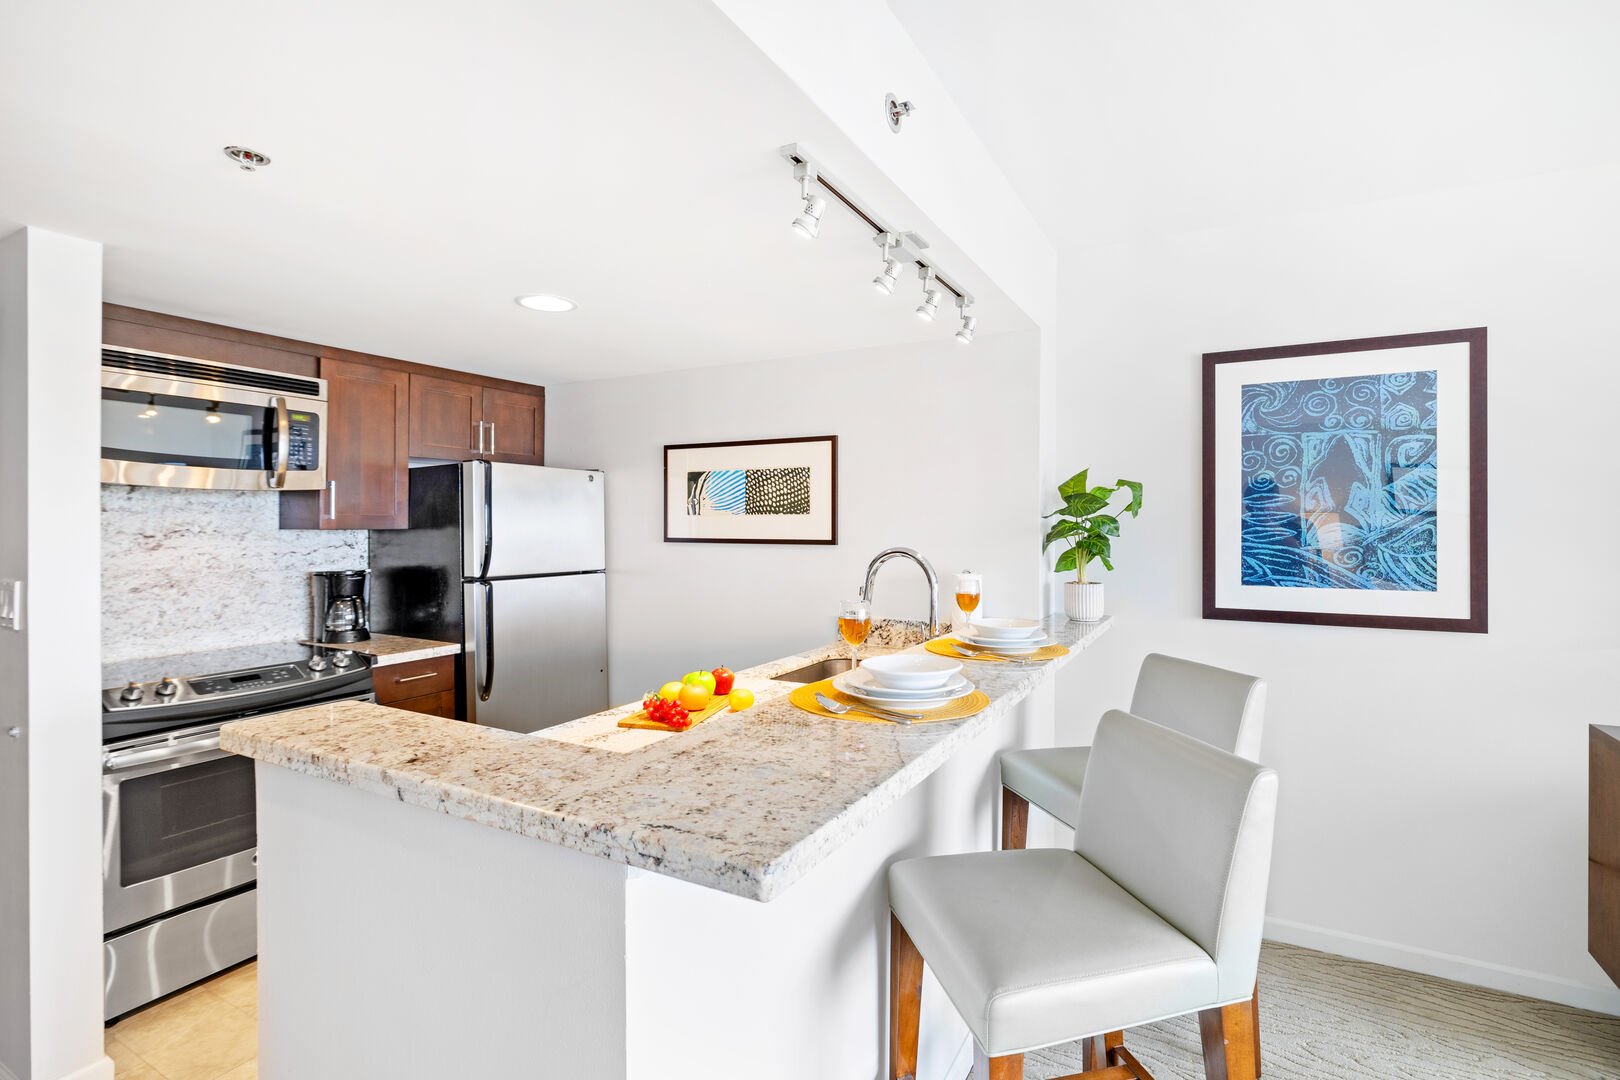 Fully equipped kitchen with elegant countertop and 2 bar stools.